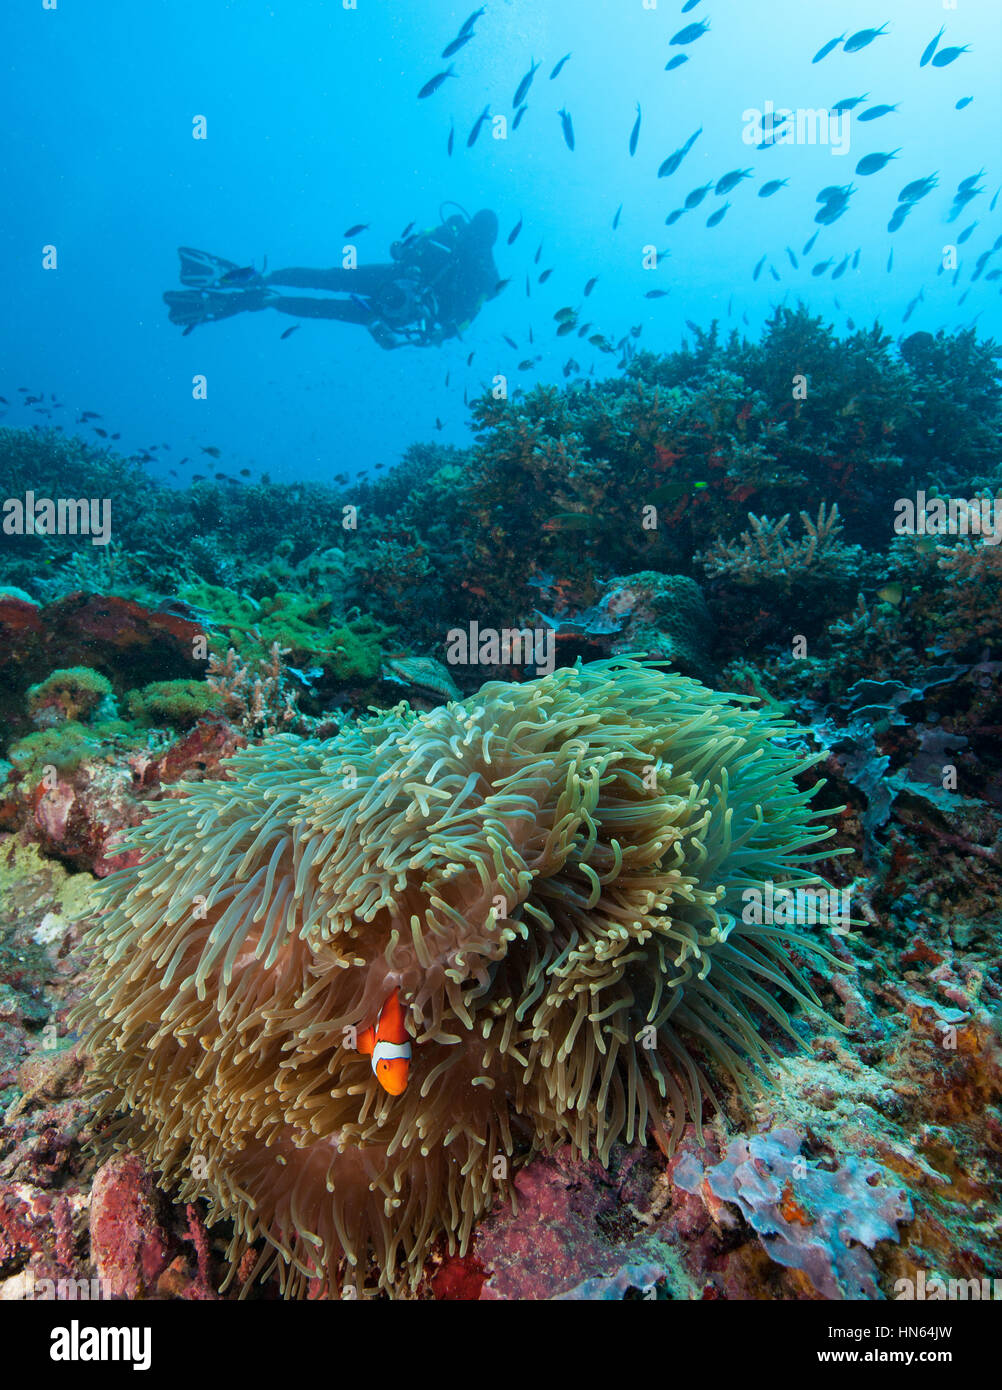 Lush coral reef in the Philippines. Stock Photo